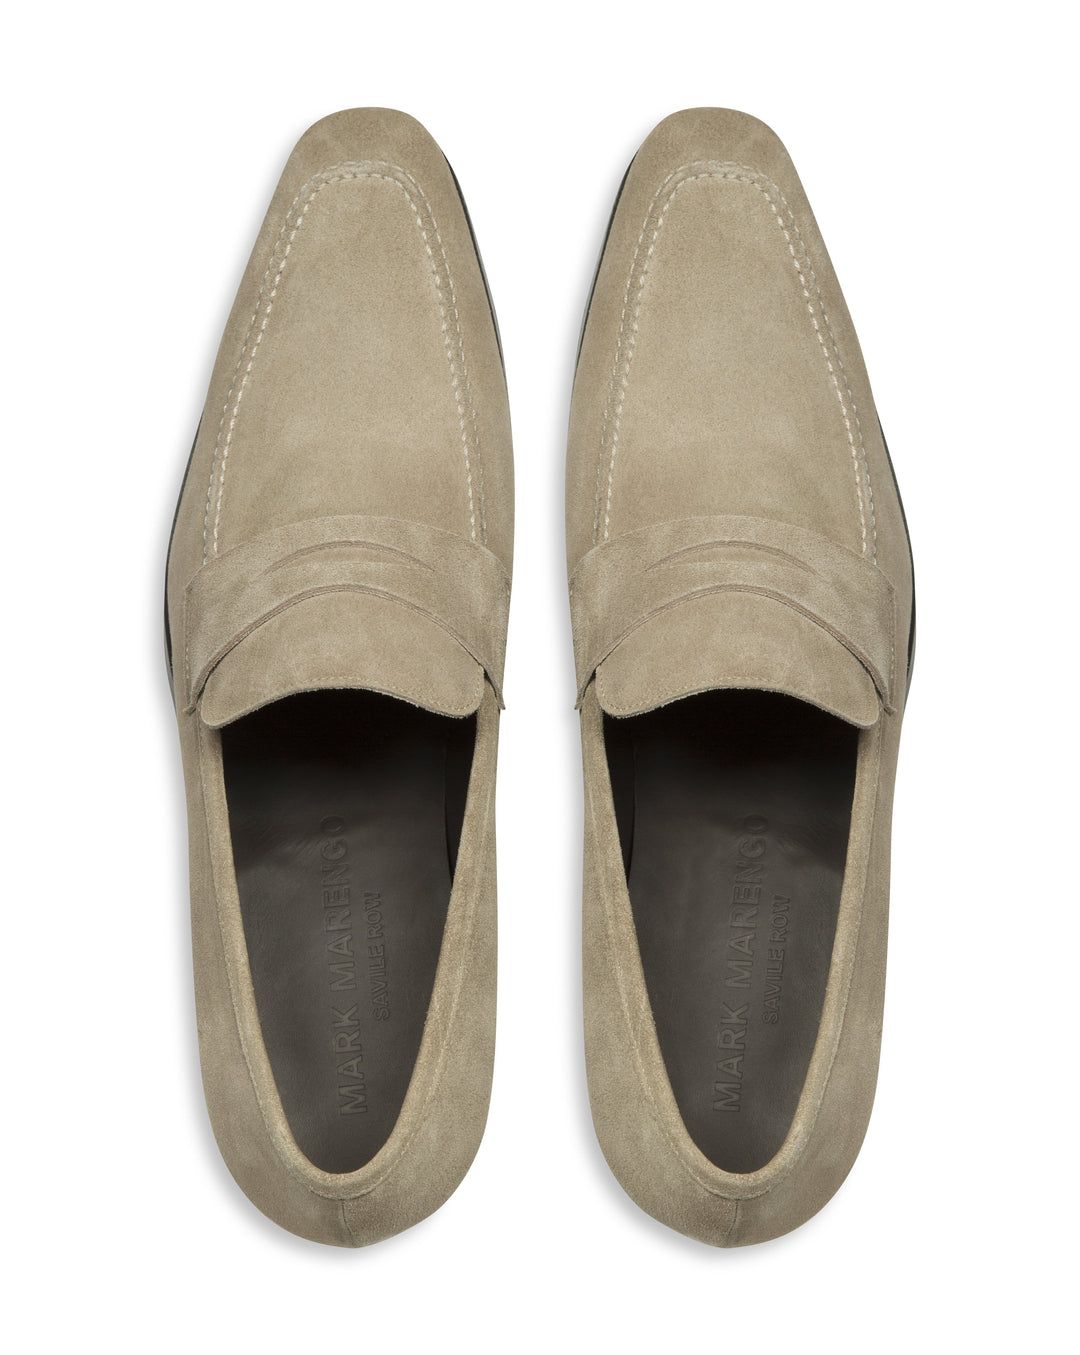 Beige Suede Hand-Stitched Penny Loafer